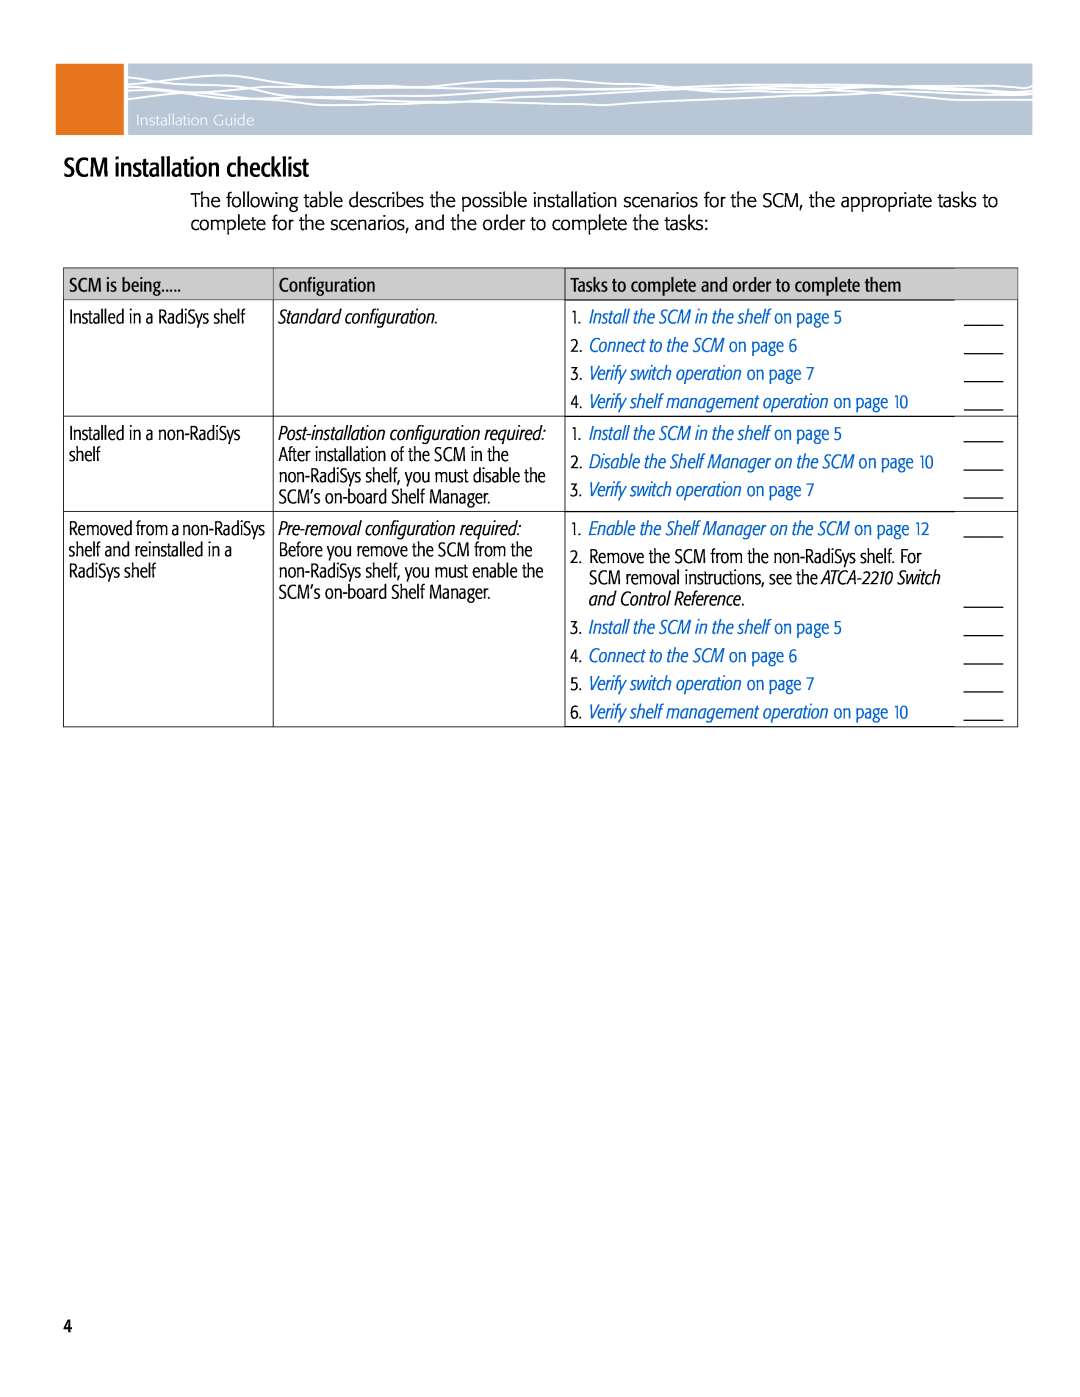 Symantec ATCA-2210 SCM installation checklist, Standard configuration, and Control Reference, Connect to the SCM on page 